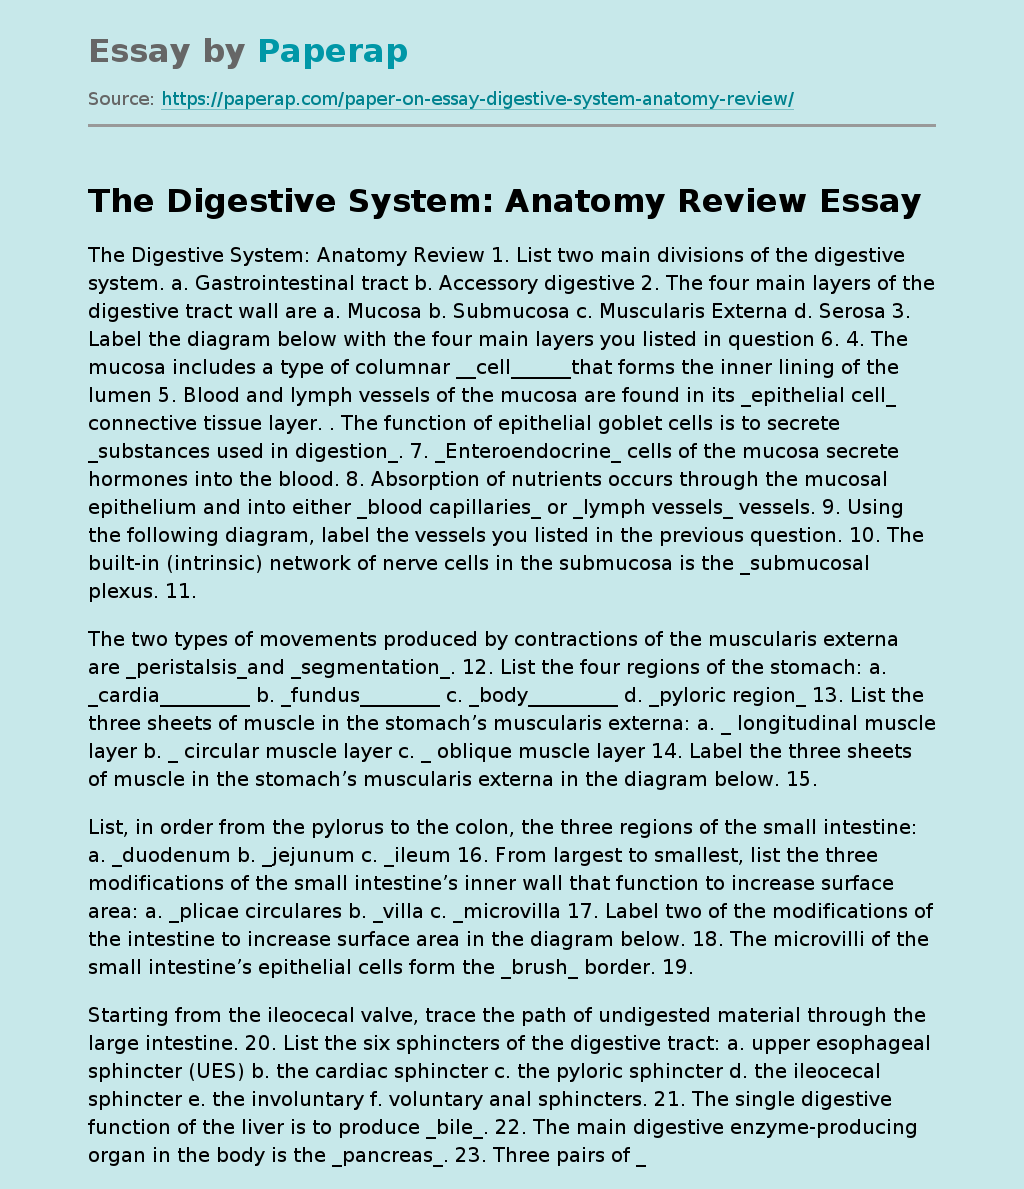 The Digestive System: Anatomy Review